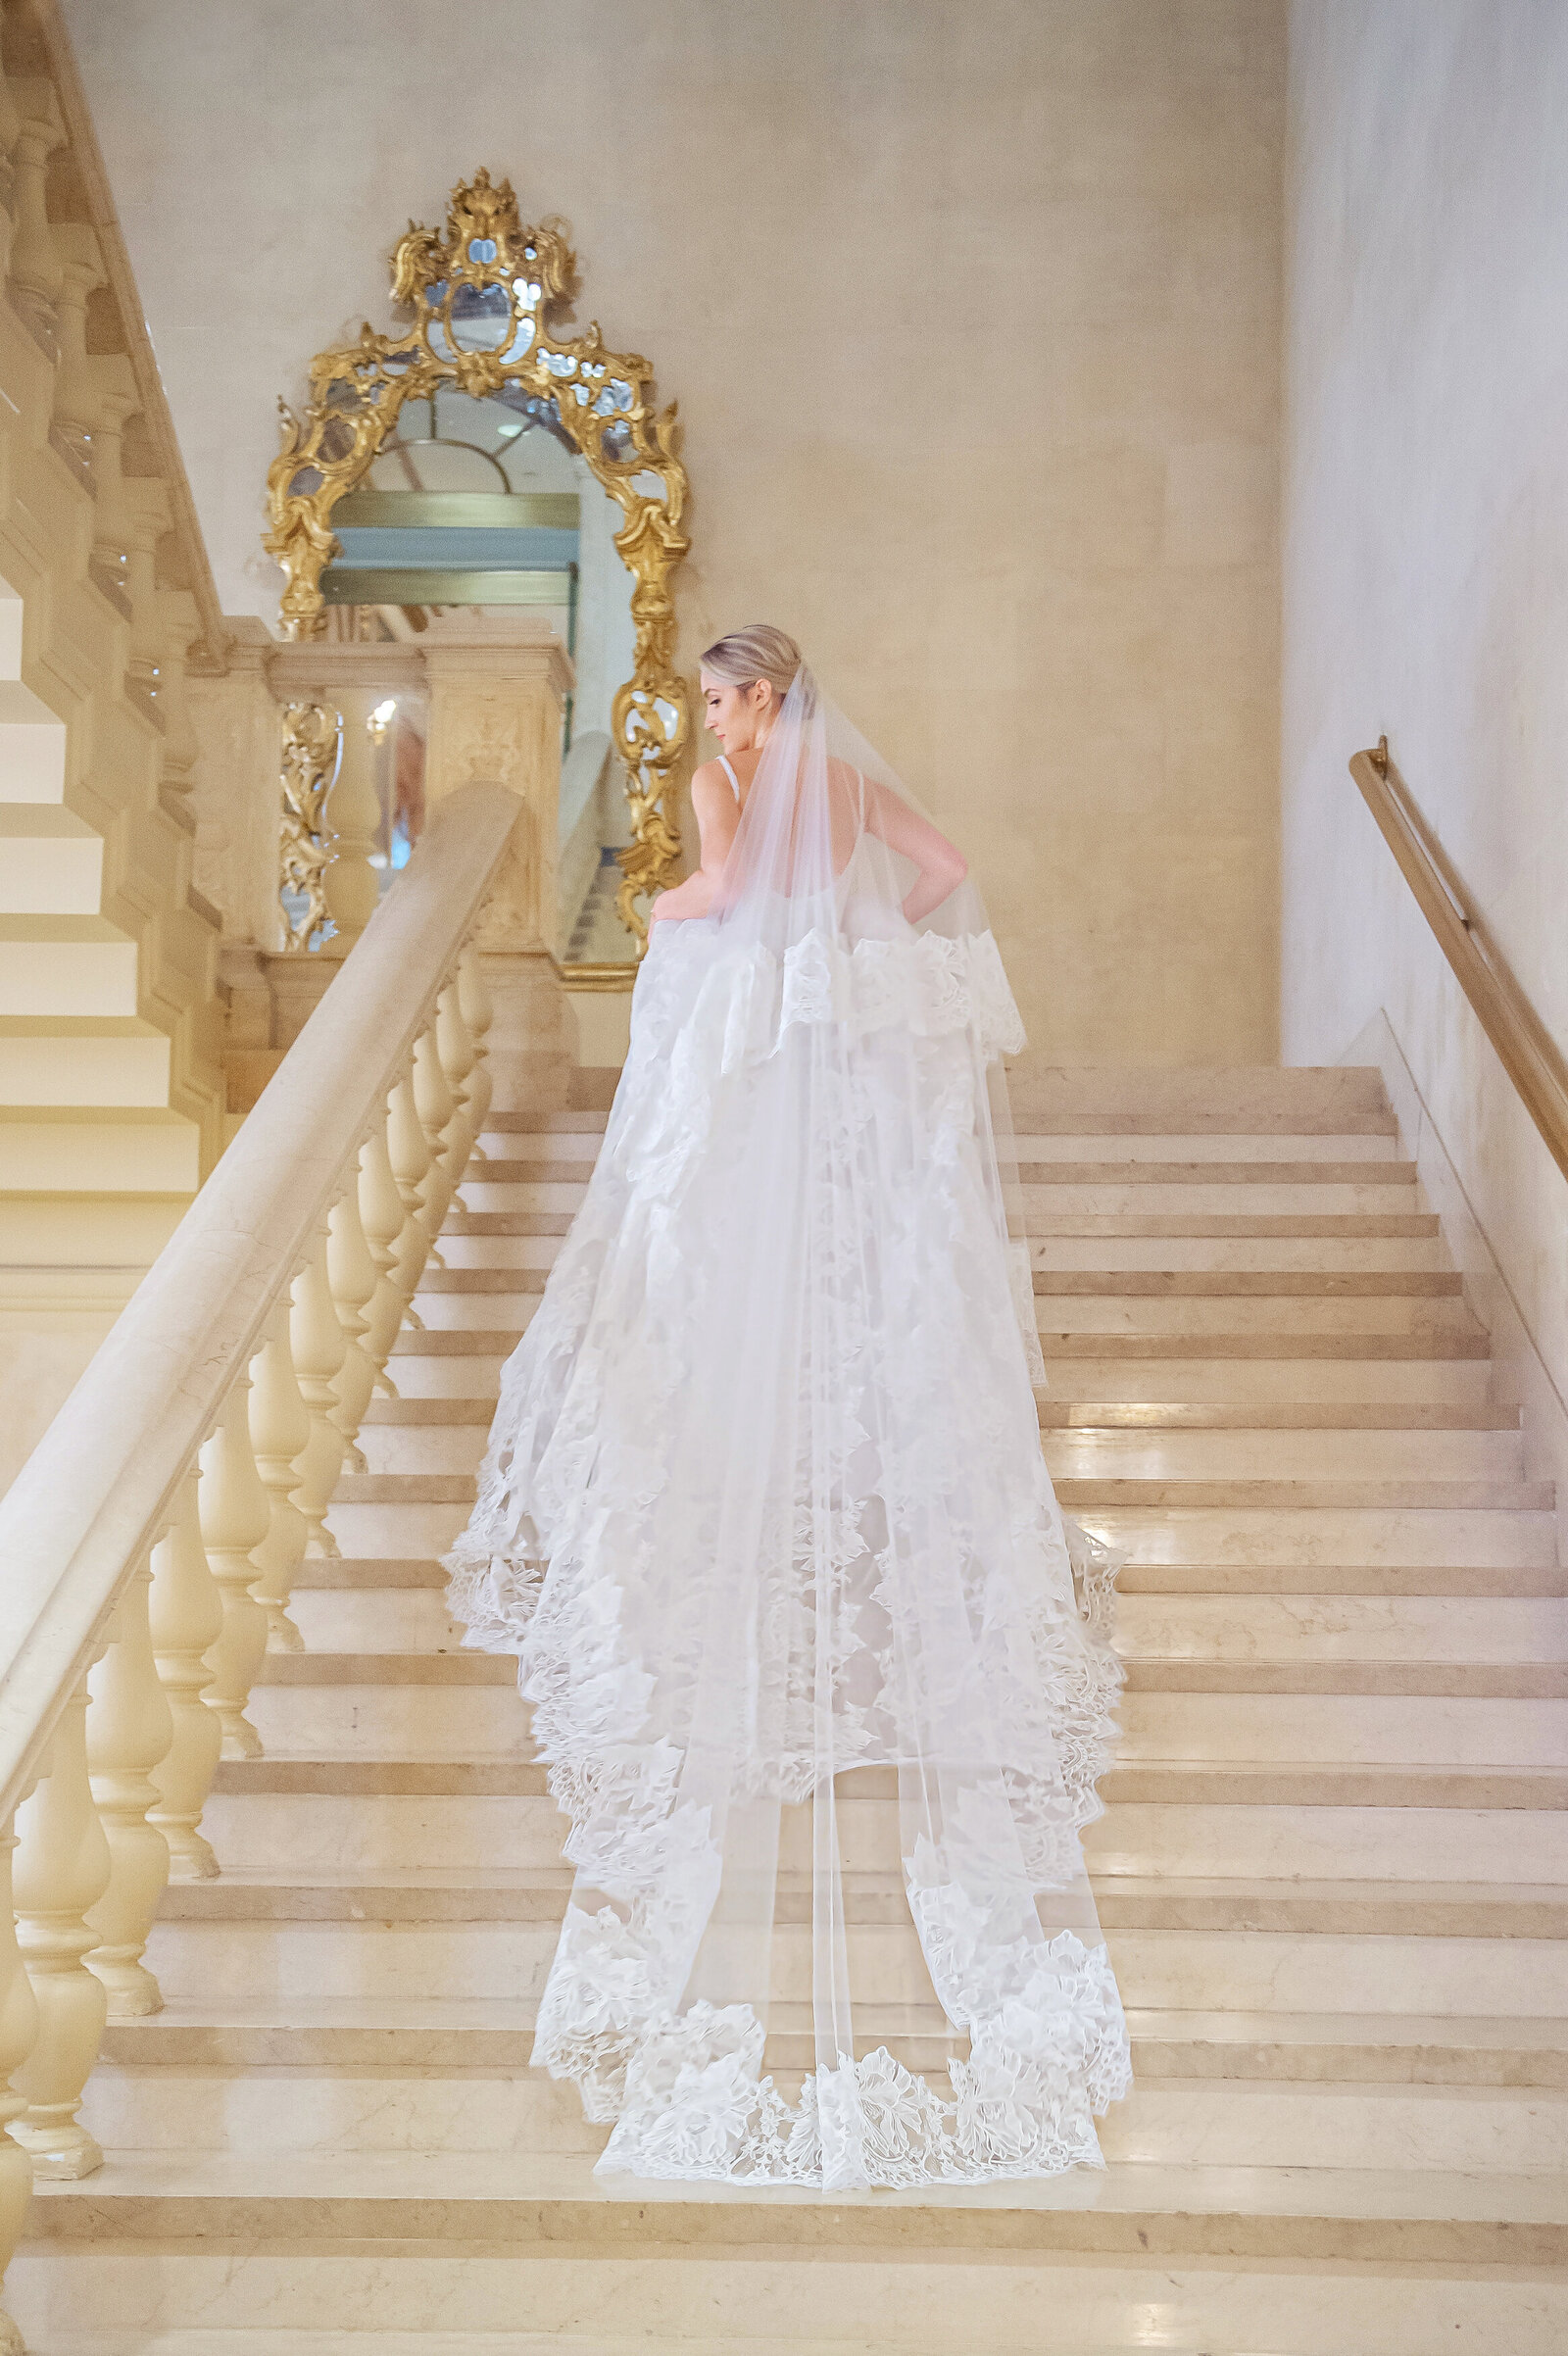 Bride with log veil walking up marble stairs